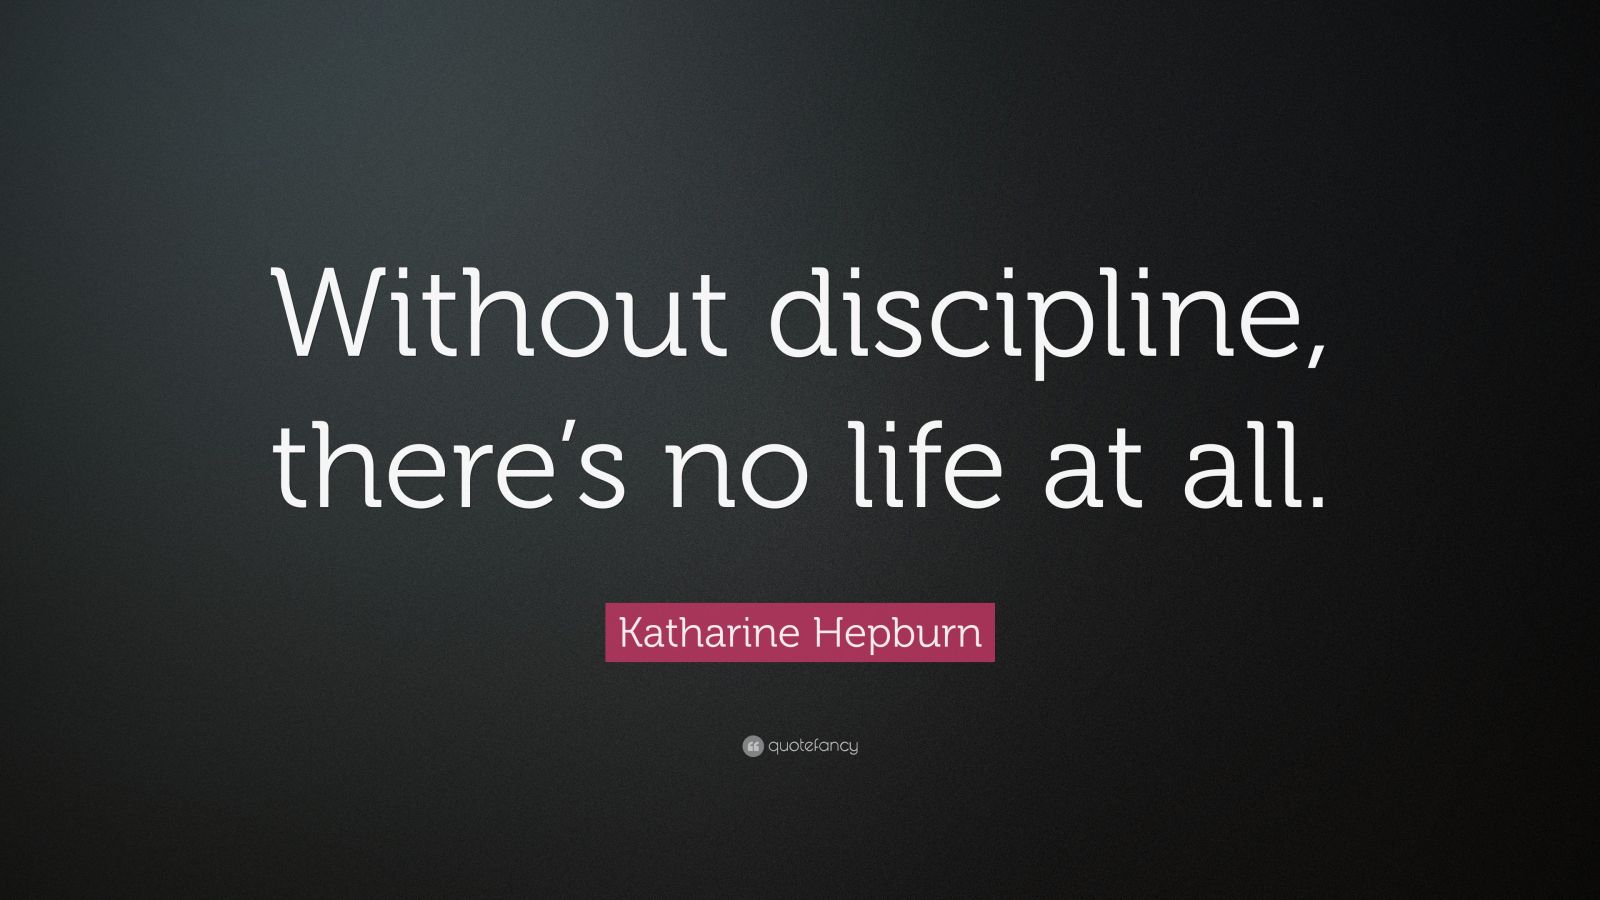 Katharine Hepburn Quote: “Without discipline, there’s no life at all ...